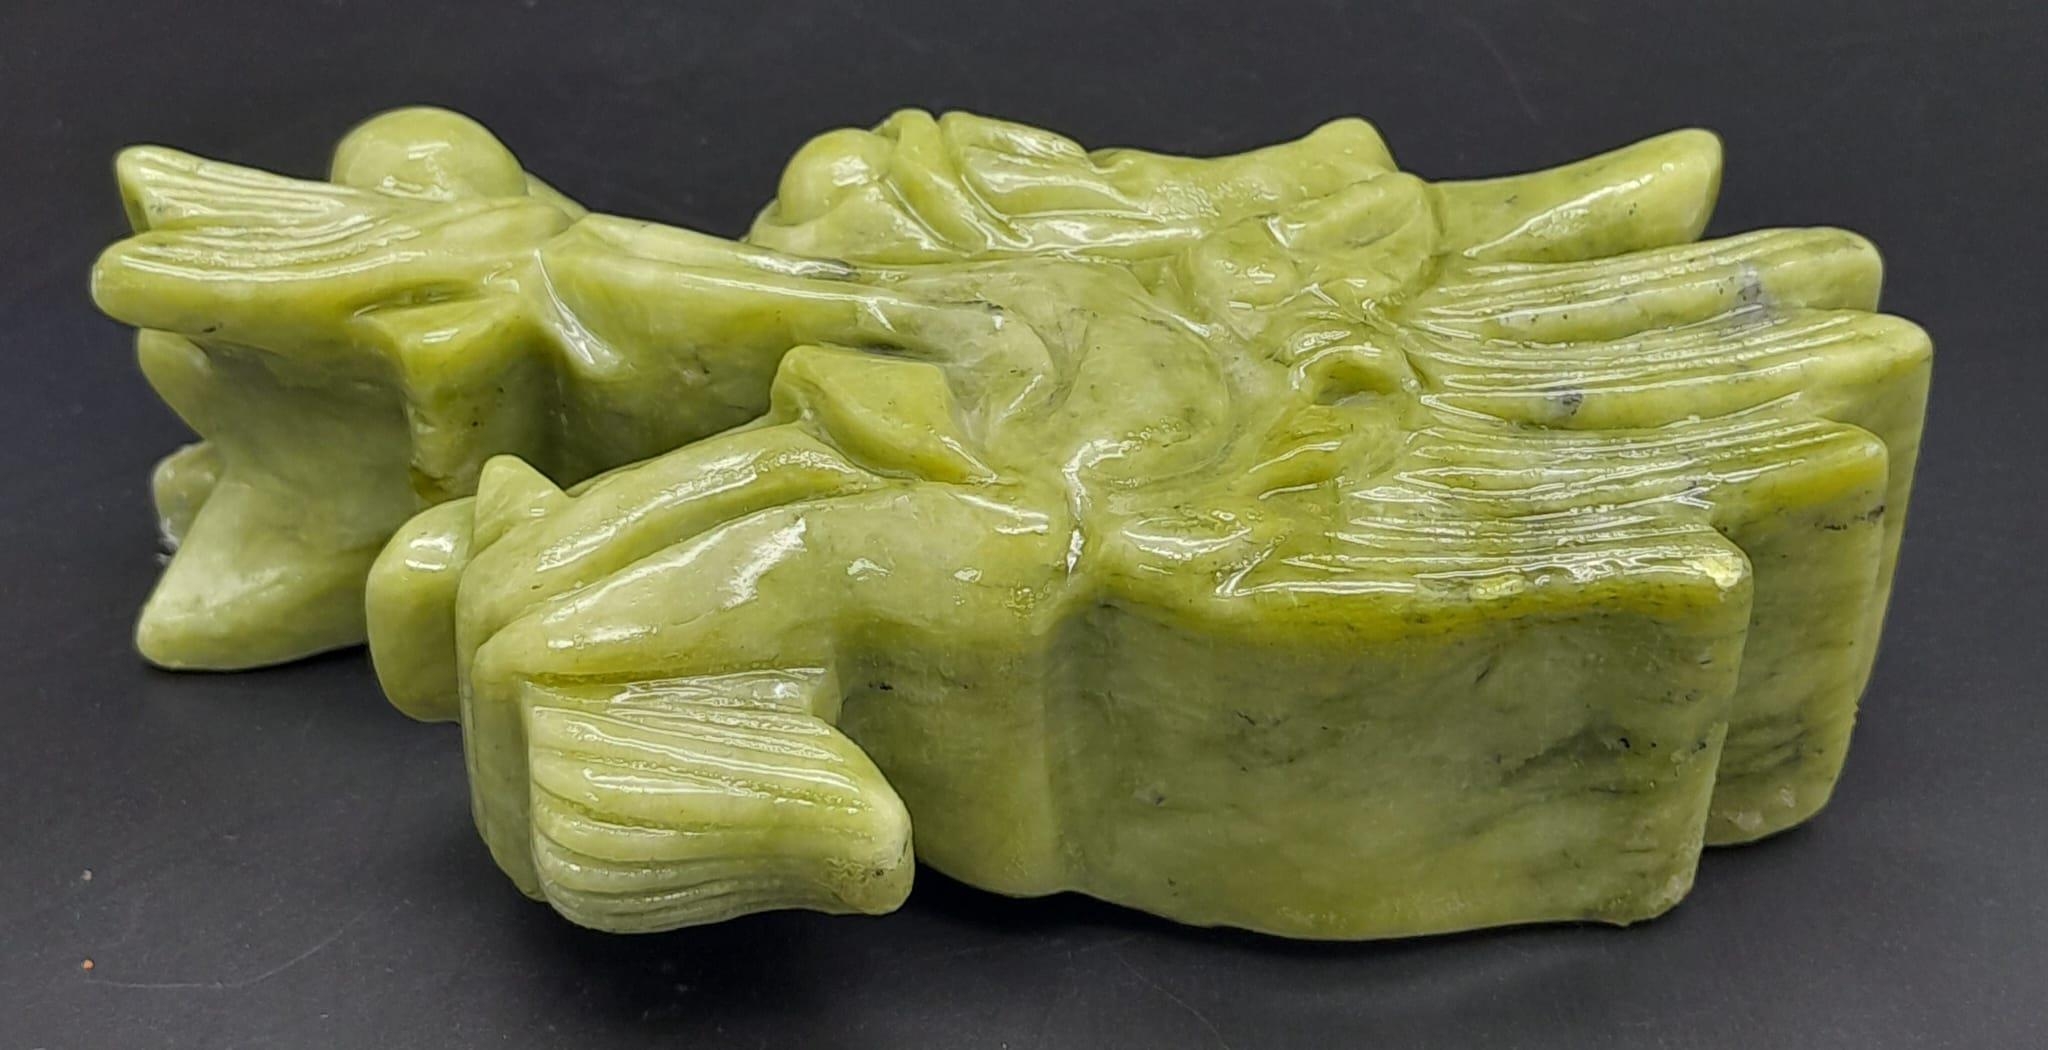 A Chinese Green Jade Dragon's Head Figure. The perfect ornament.... Or paperweight. 15cm x 8cm. 570g - Image 4 of 6